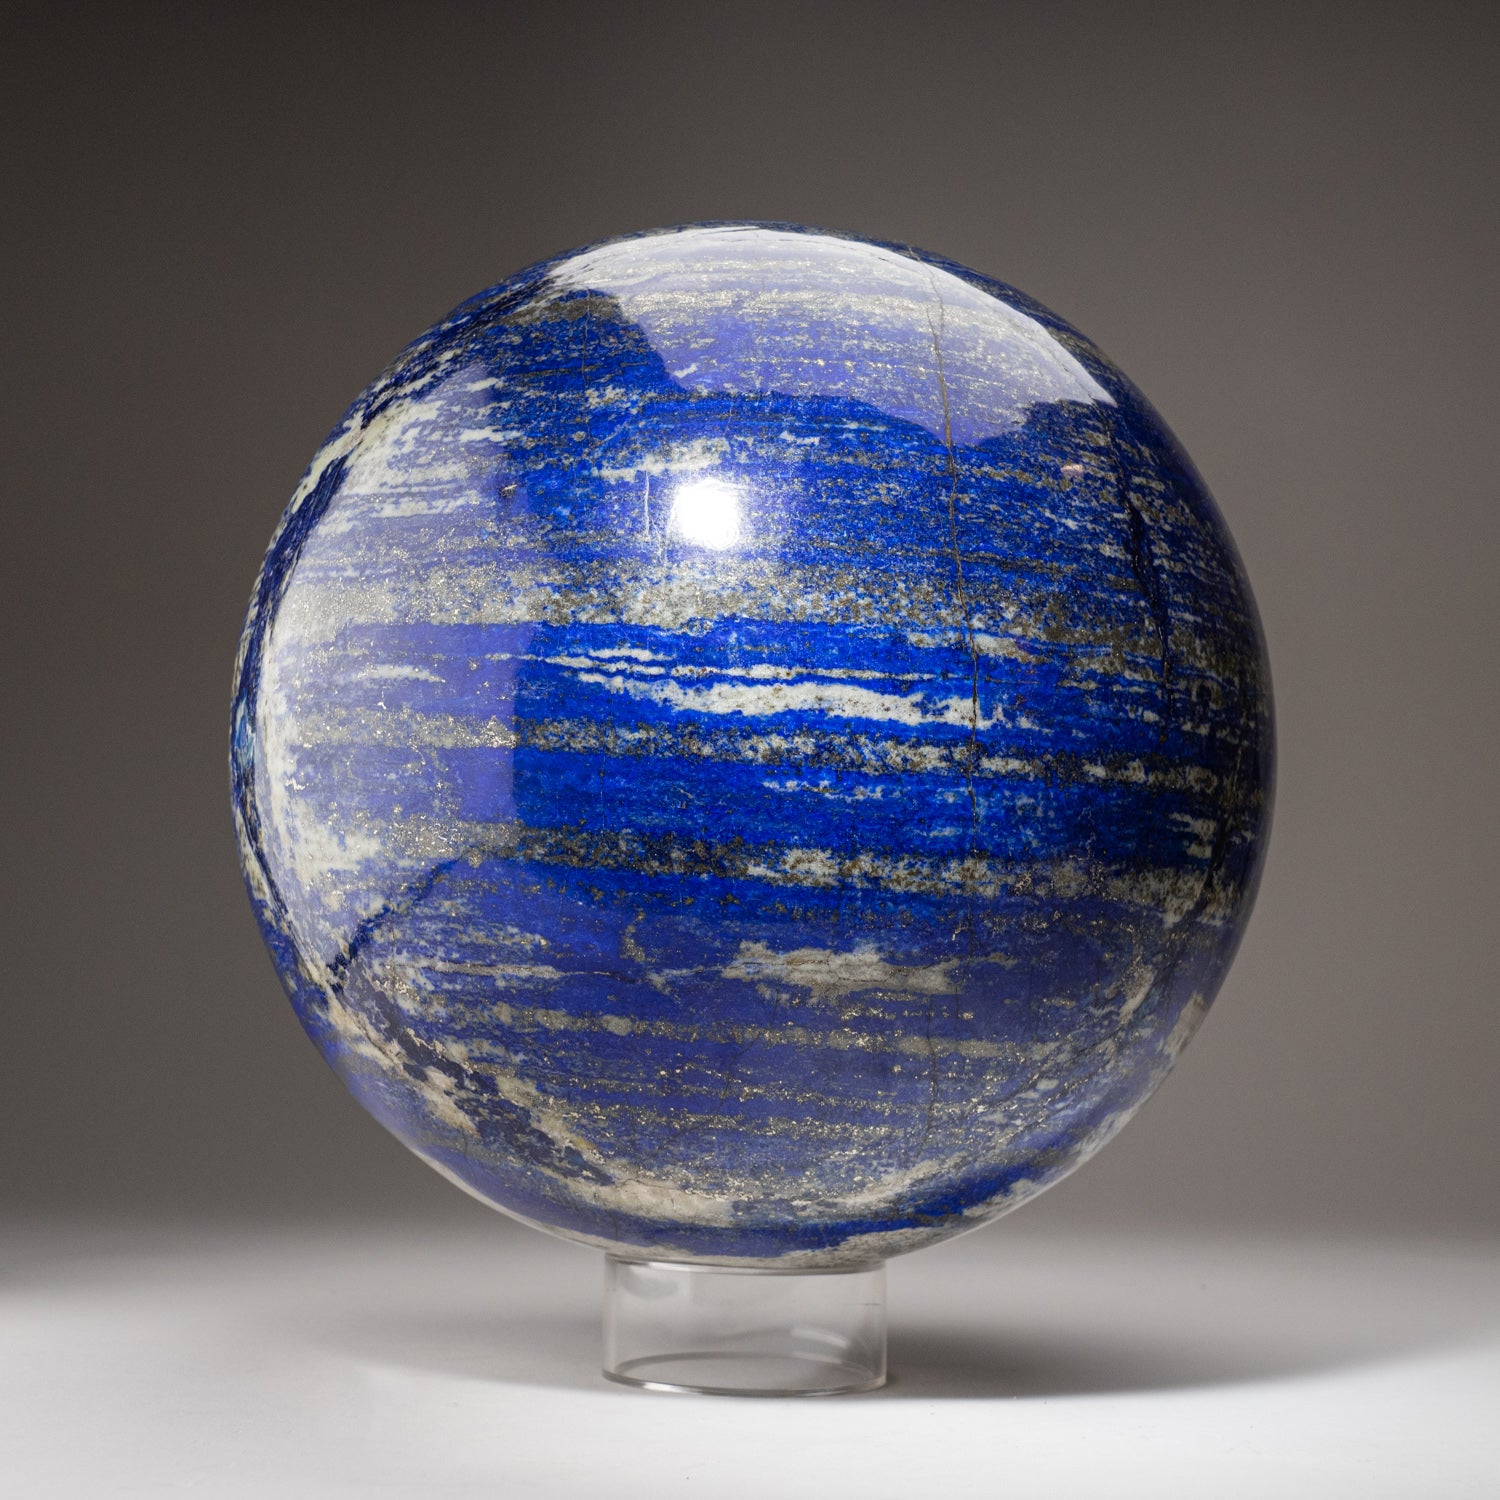 Genuine Polished Lapis Lazuli Sphere from Afghanistan (12", 77.5 lbs)